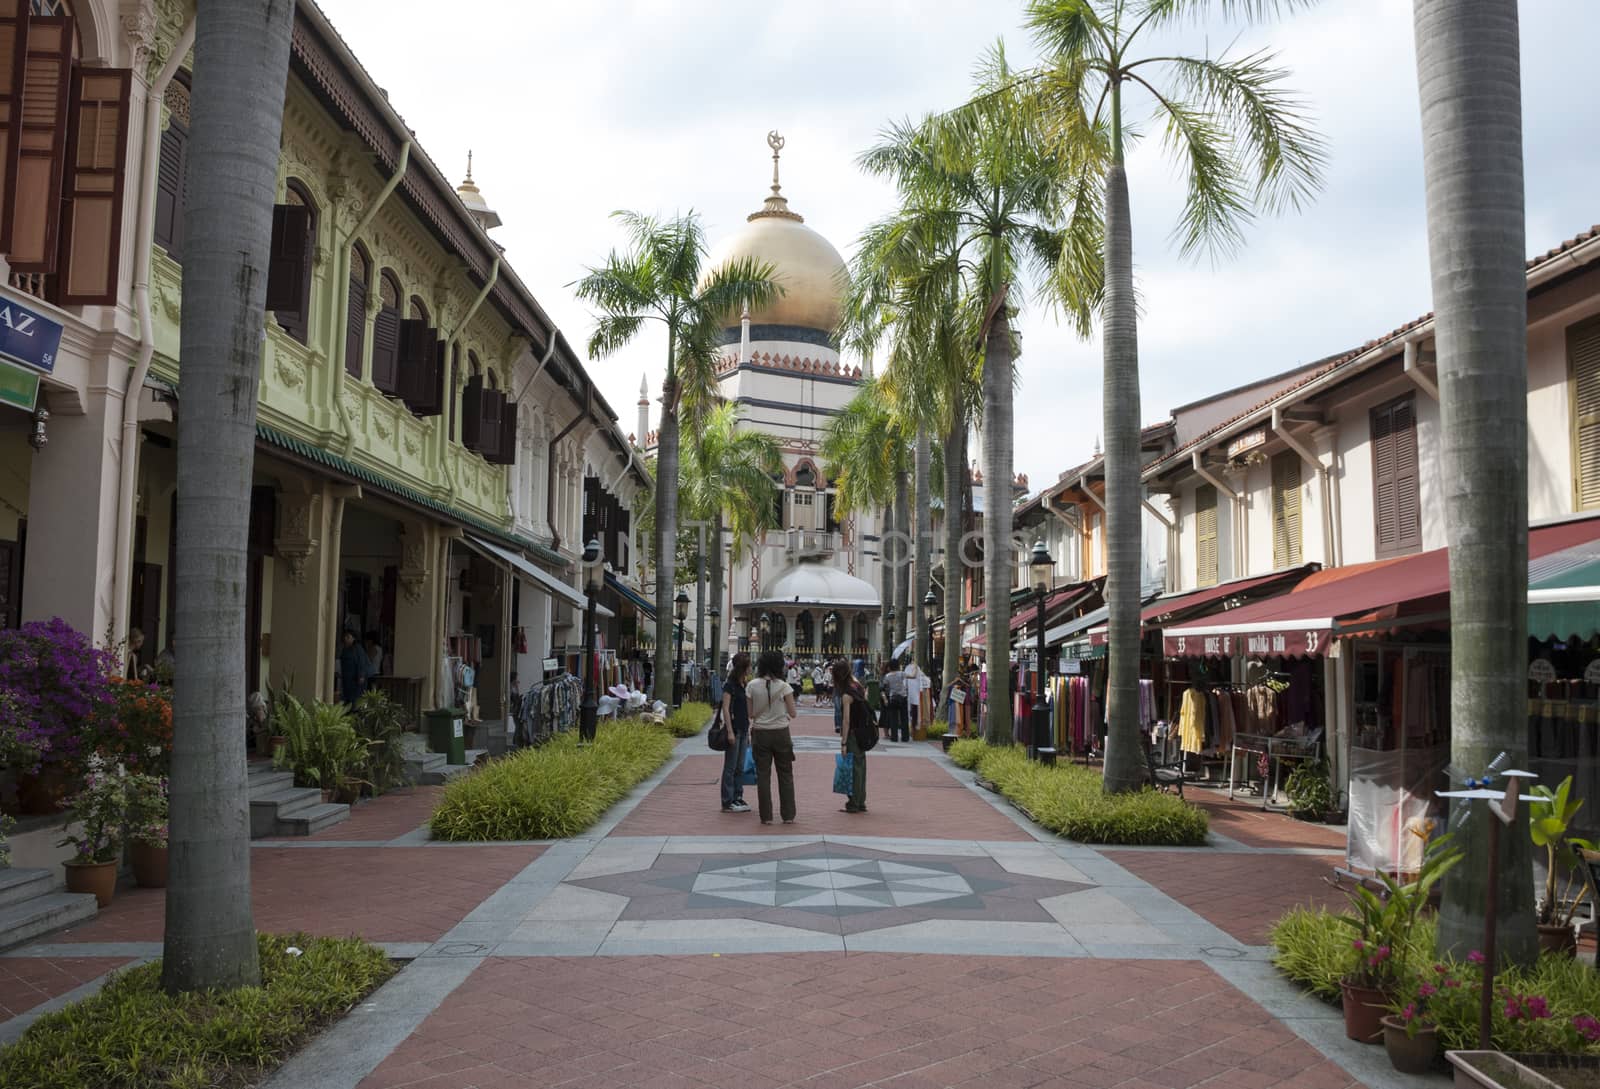 sultan mosk singapore by compuinfoto